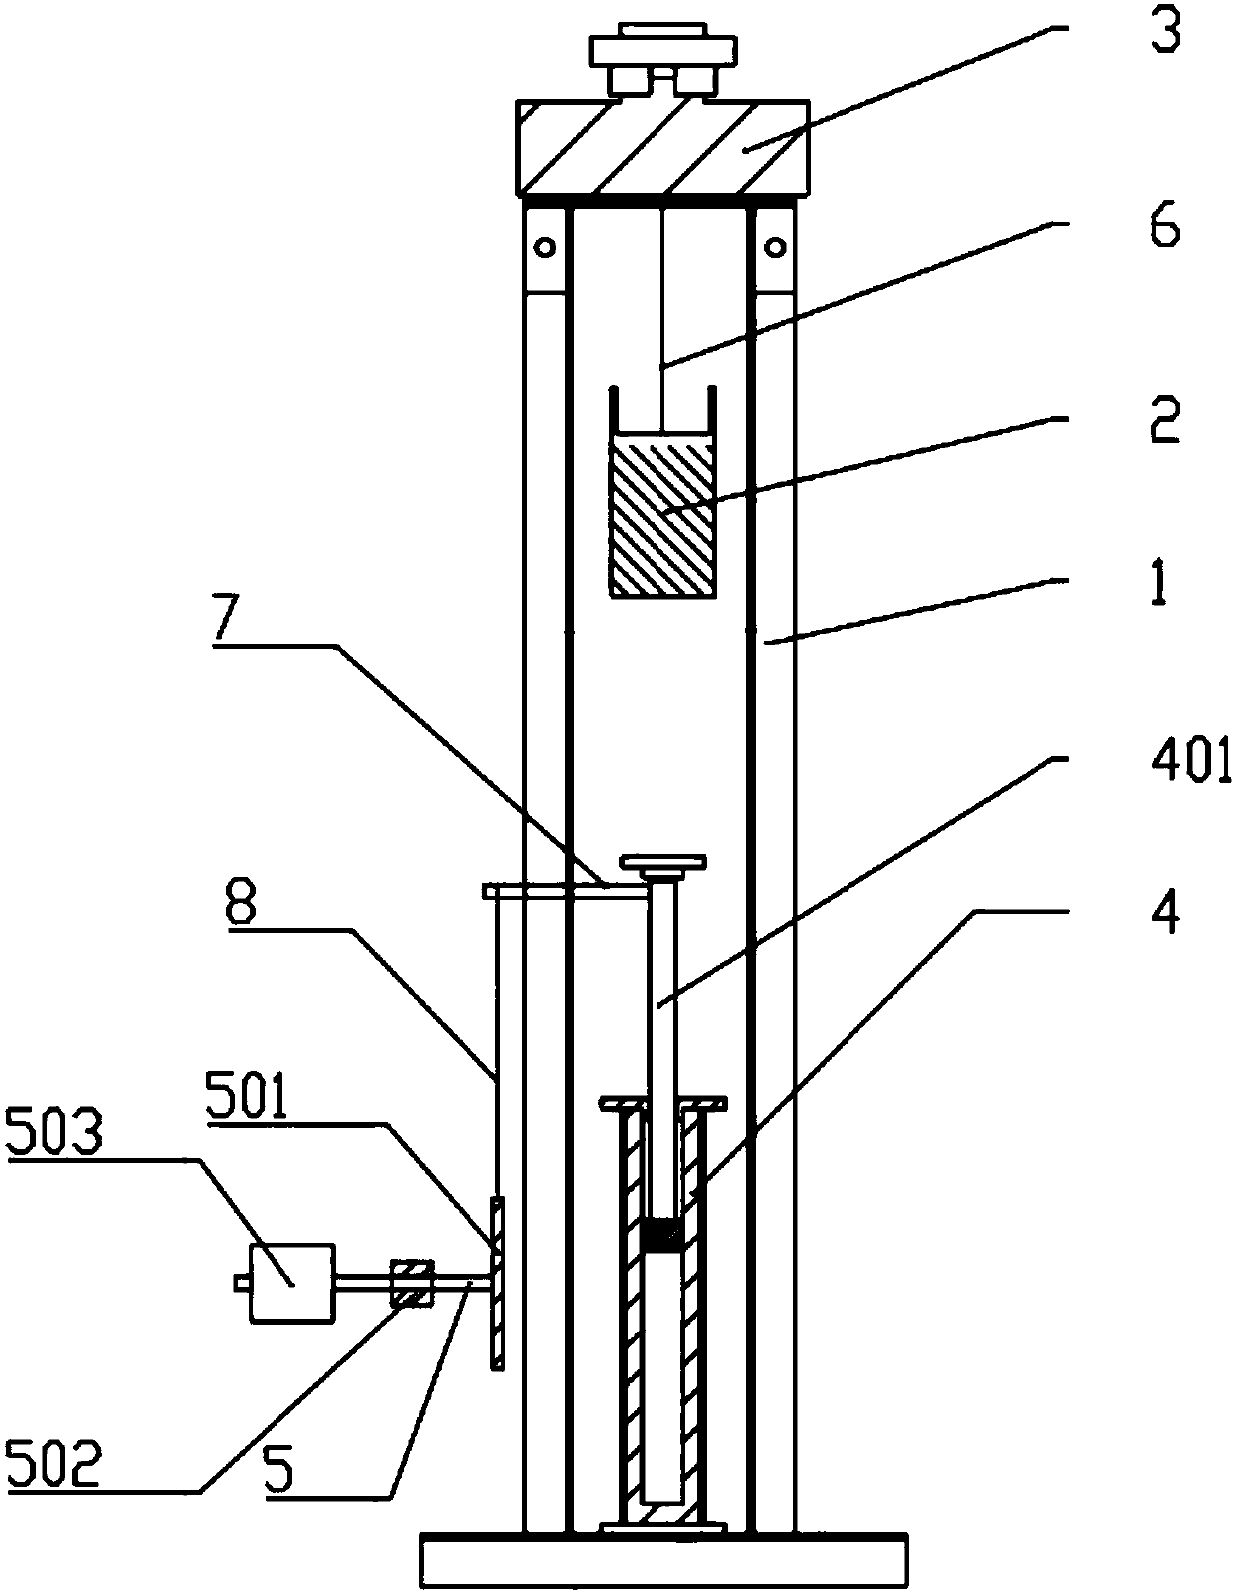 Piston motion displacement measurement system for free piston compression combustion device